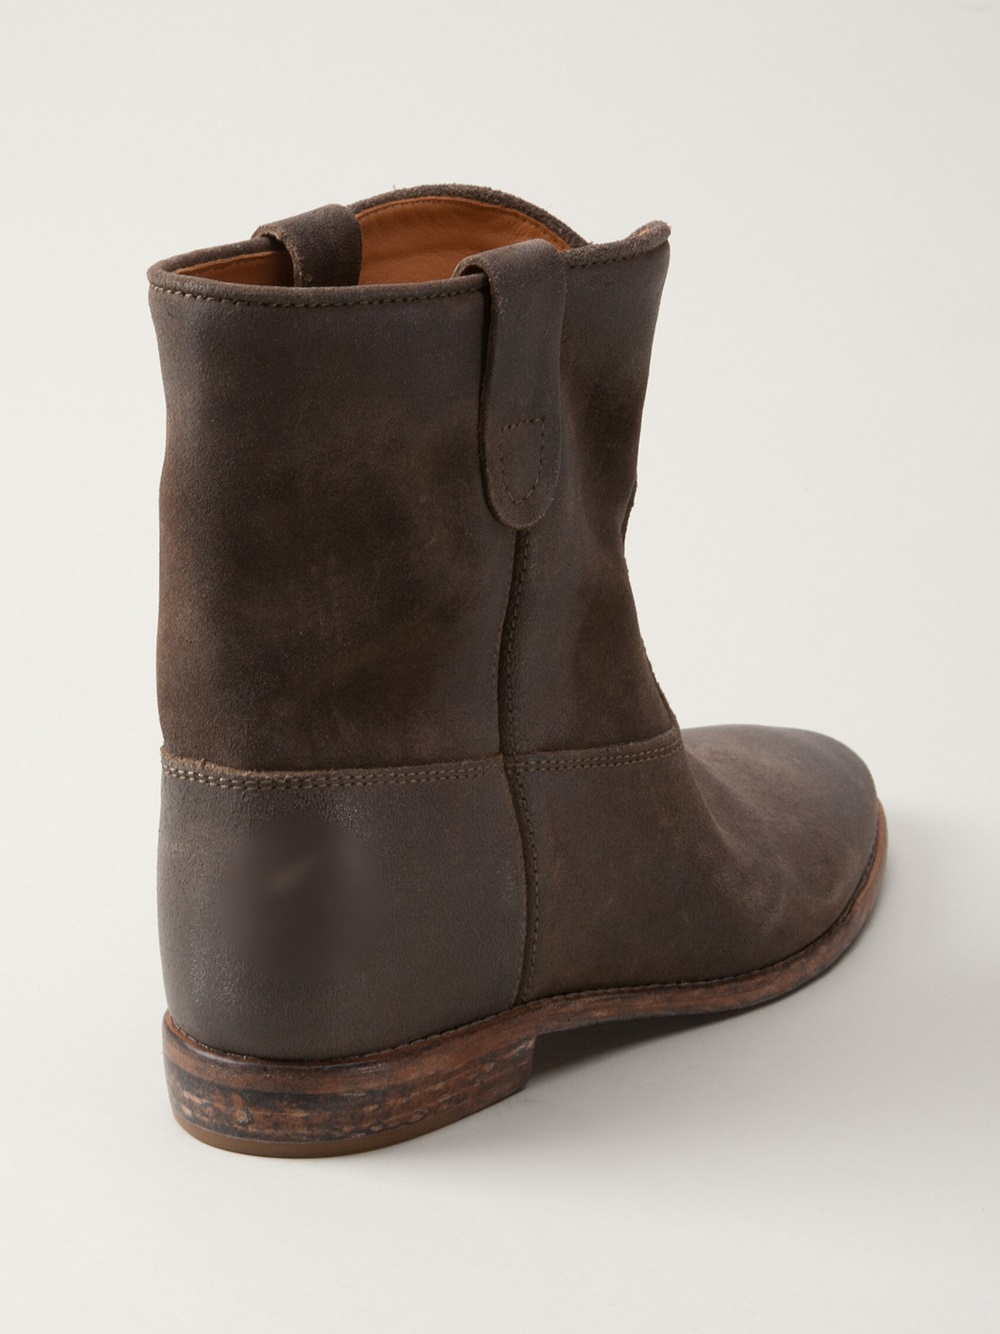 Isabel Marant Crisi Boot in Brown - Lyst